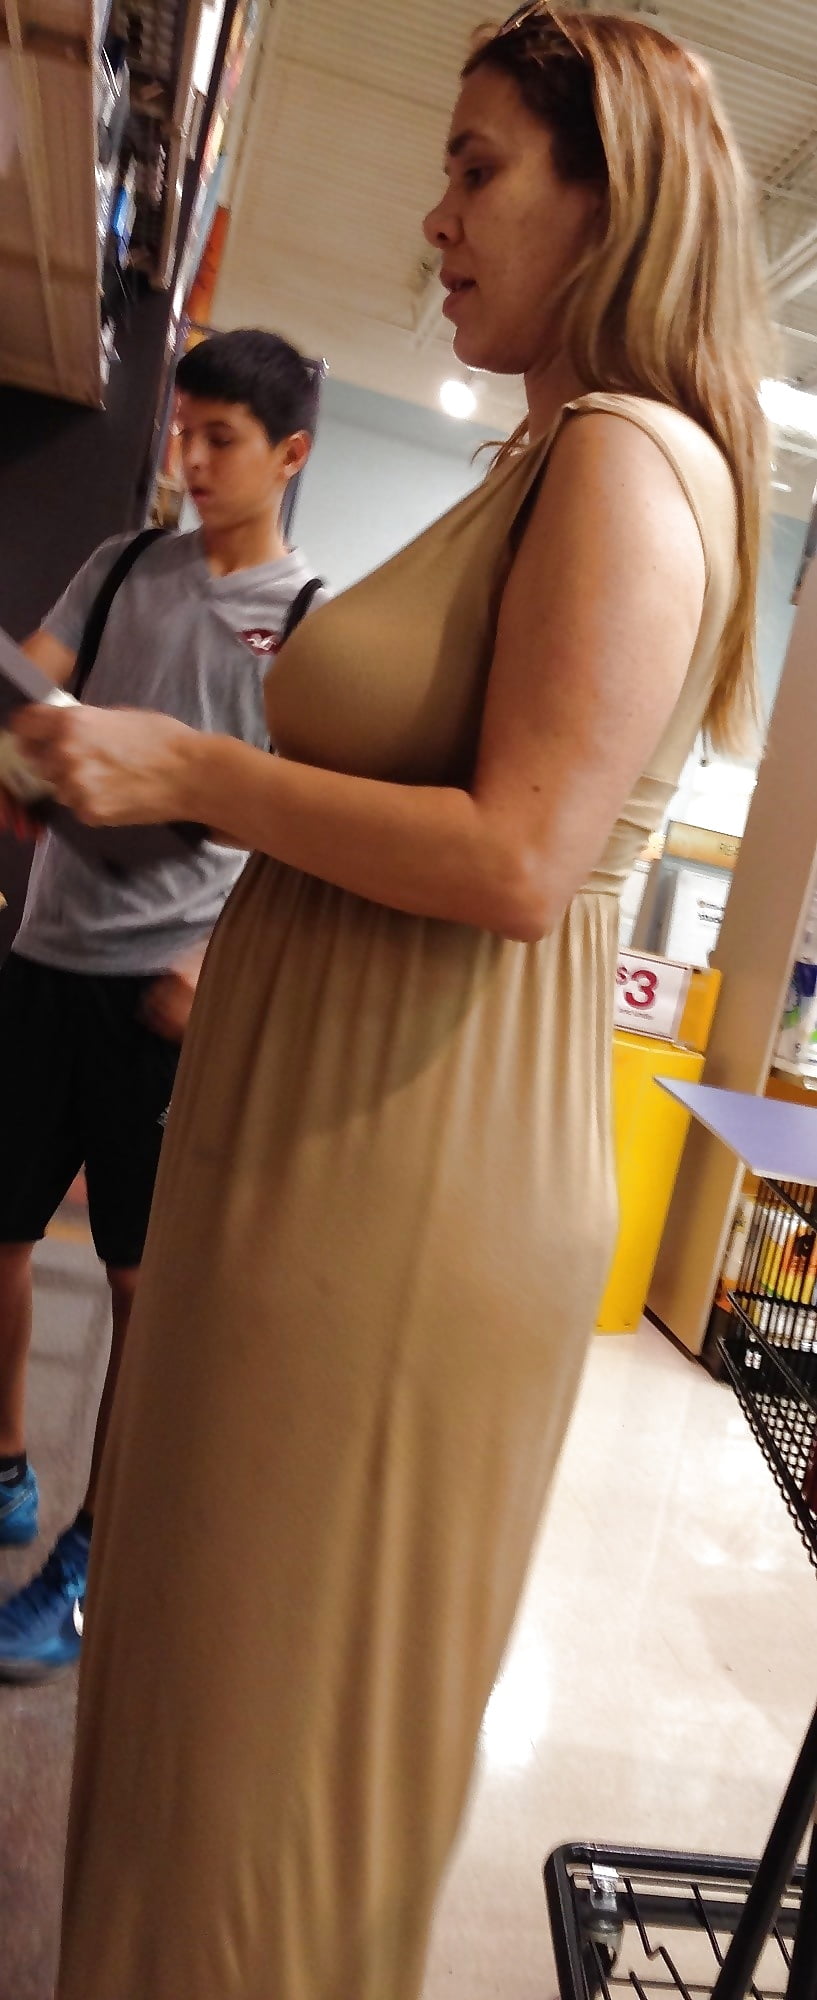 Candid Busty Latina Milf With Pokies Shopping 19 Fotos